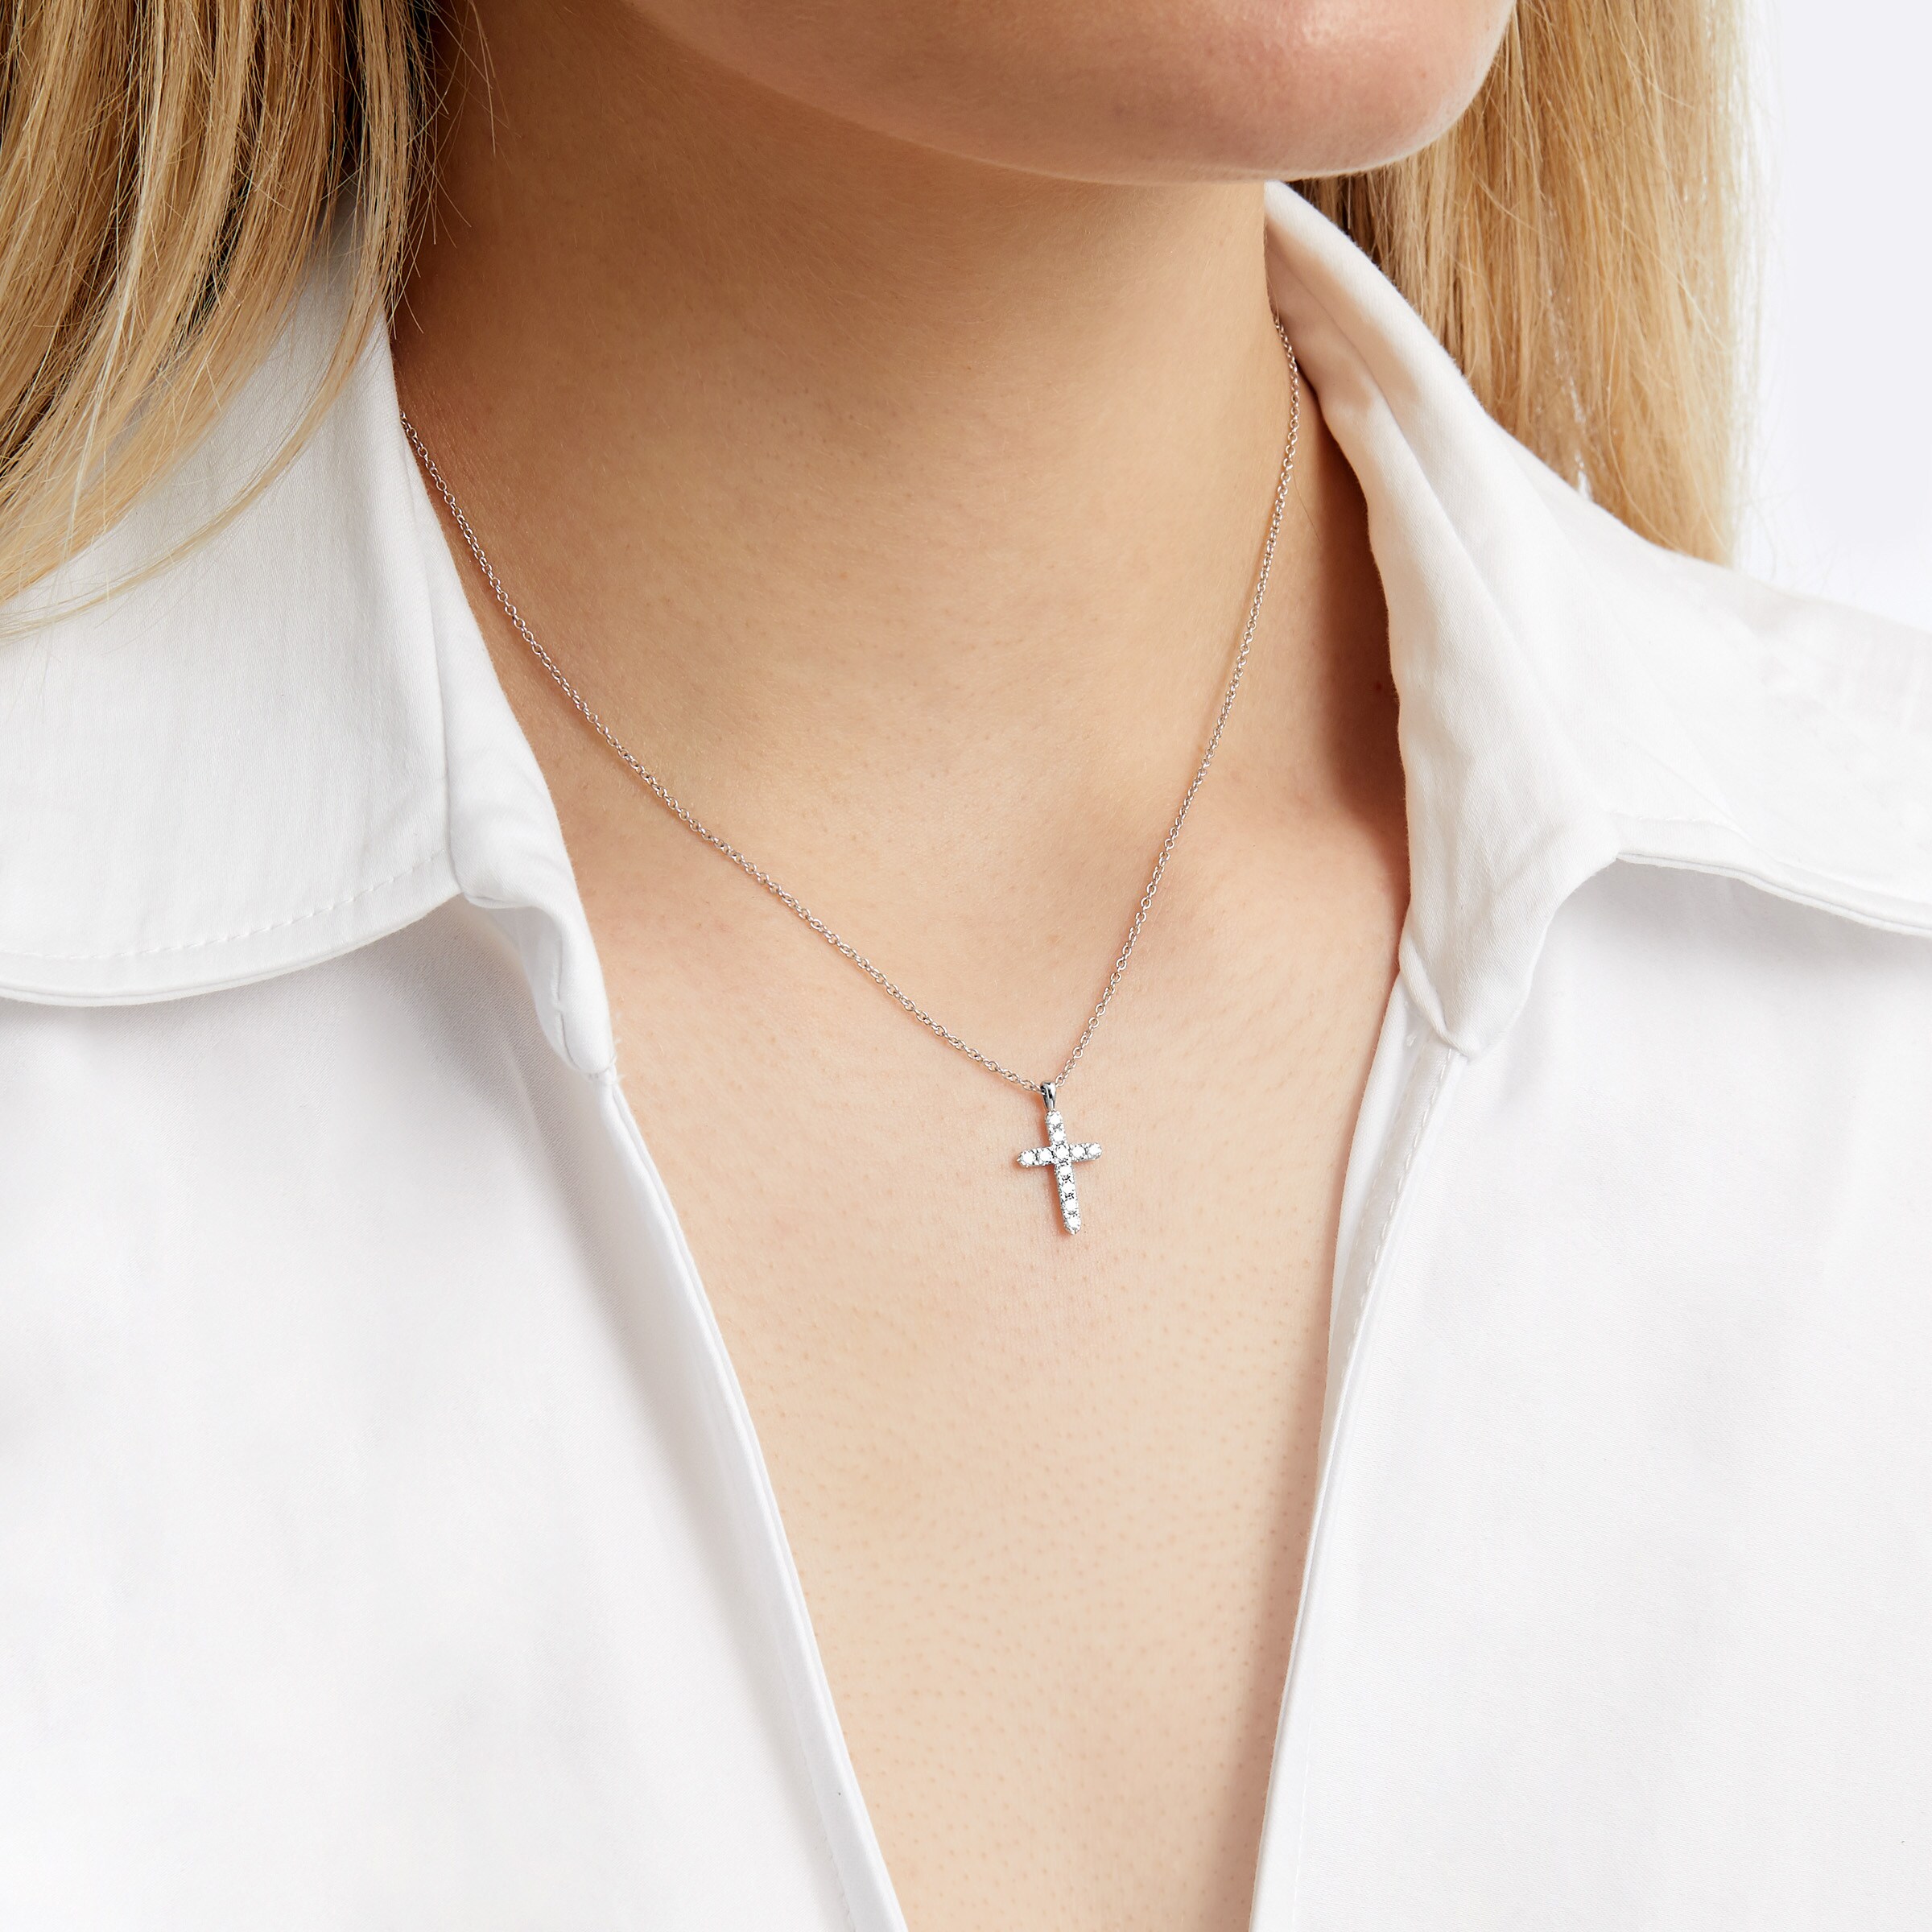 18ct White Gold 35mm Solid Cross Pendant Necklace